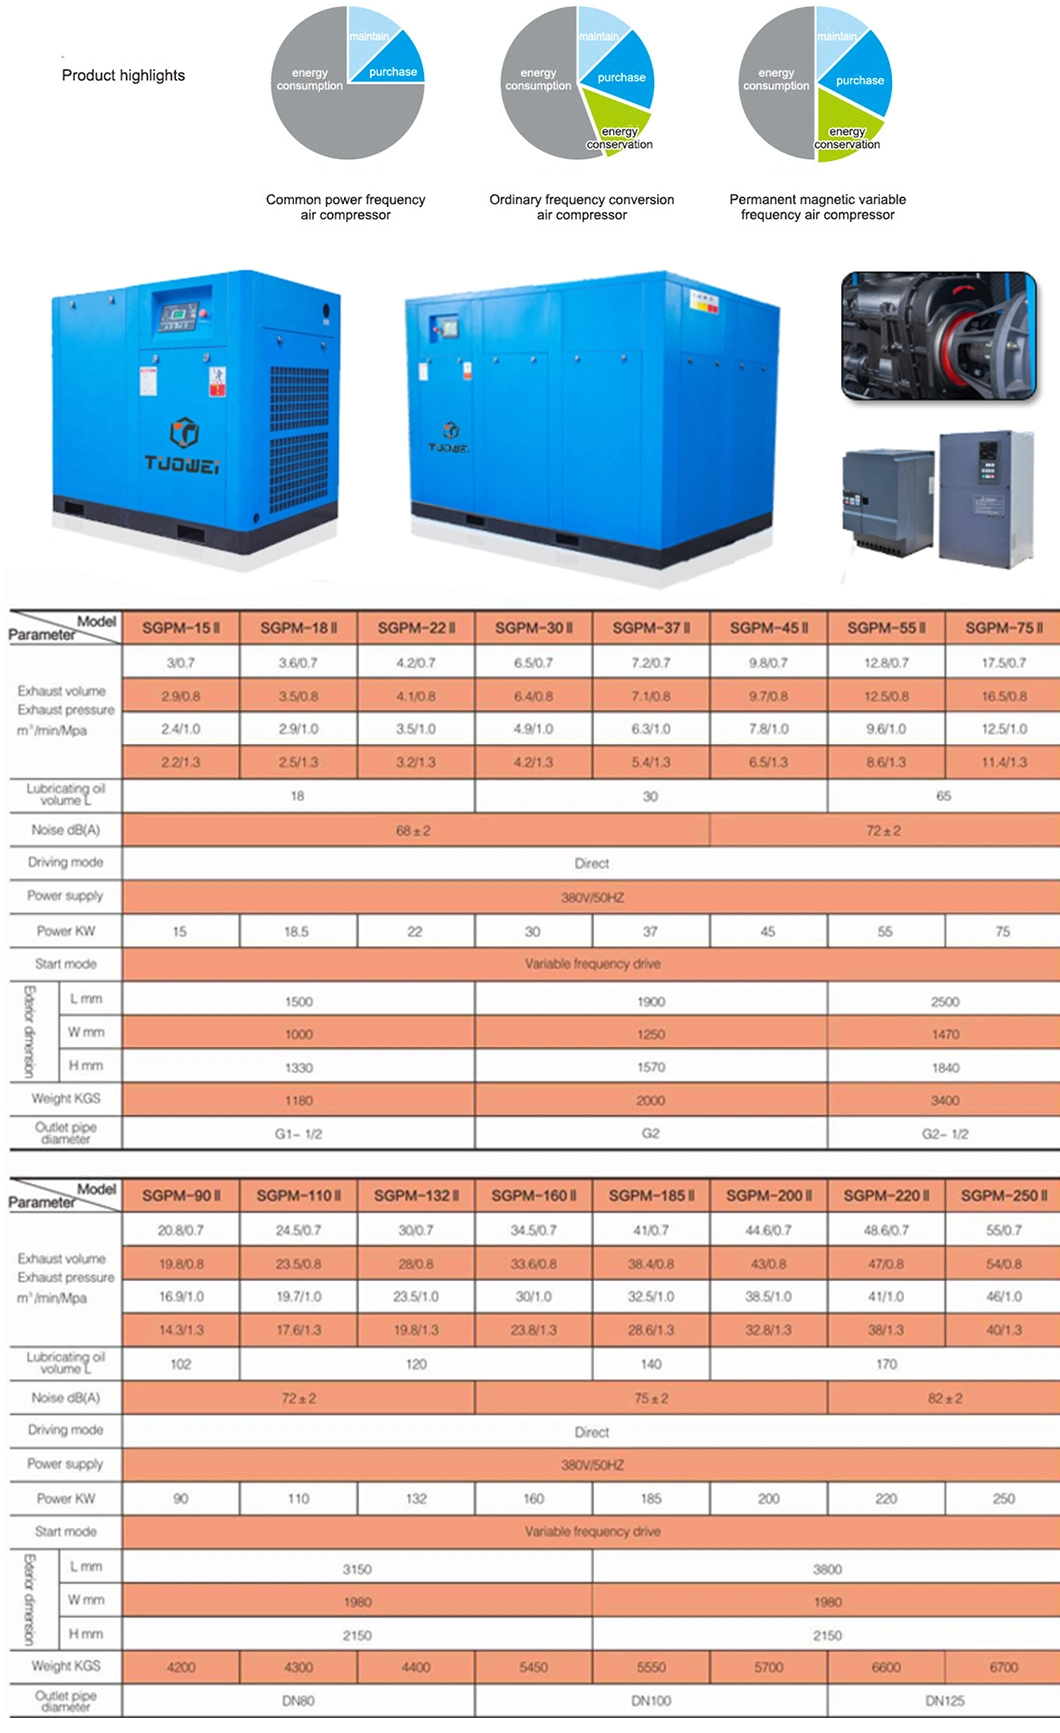 Tuowei 150HP Energy Saving Frequency Conversion Two-Stage Screw Air Compressor (SGPM-110II)